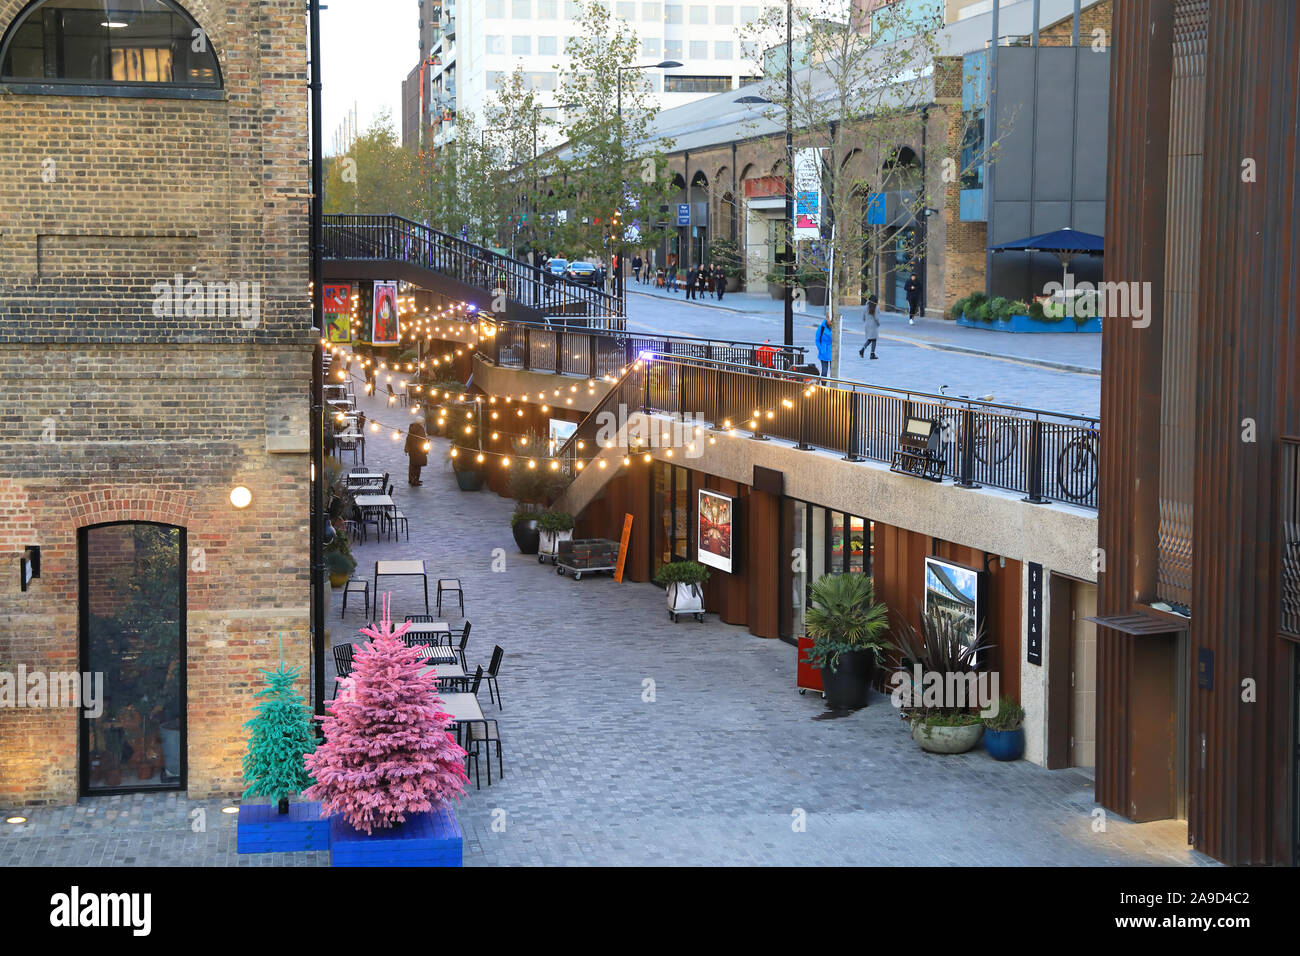 Lower Stable Street with Christmas lights, by Granary Square, KX, north London, UK Stock Photo